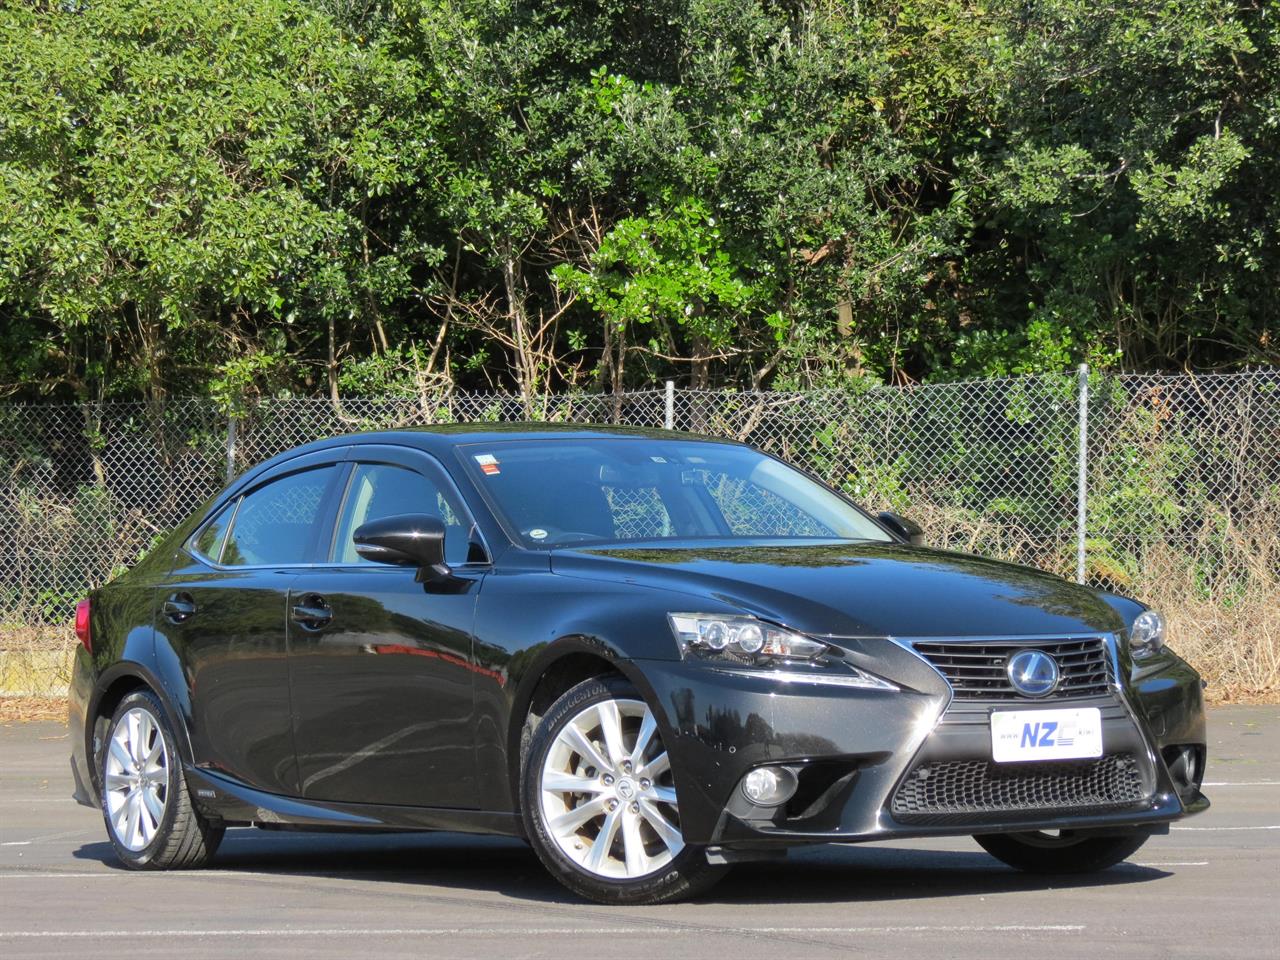 NZC 2013 Lexus IS just arrived to Auckland